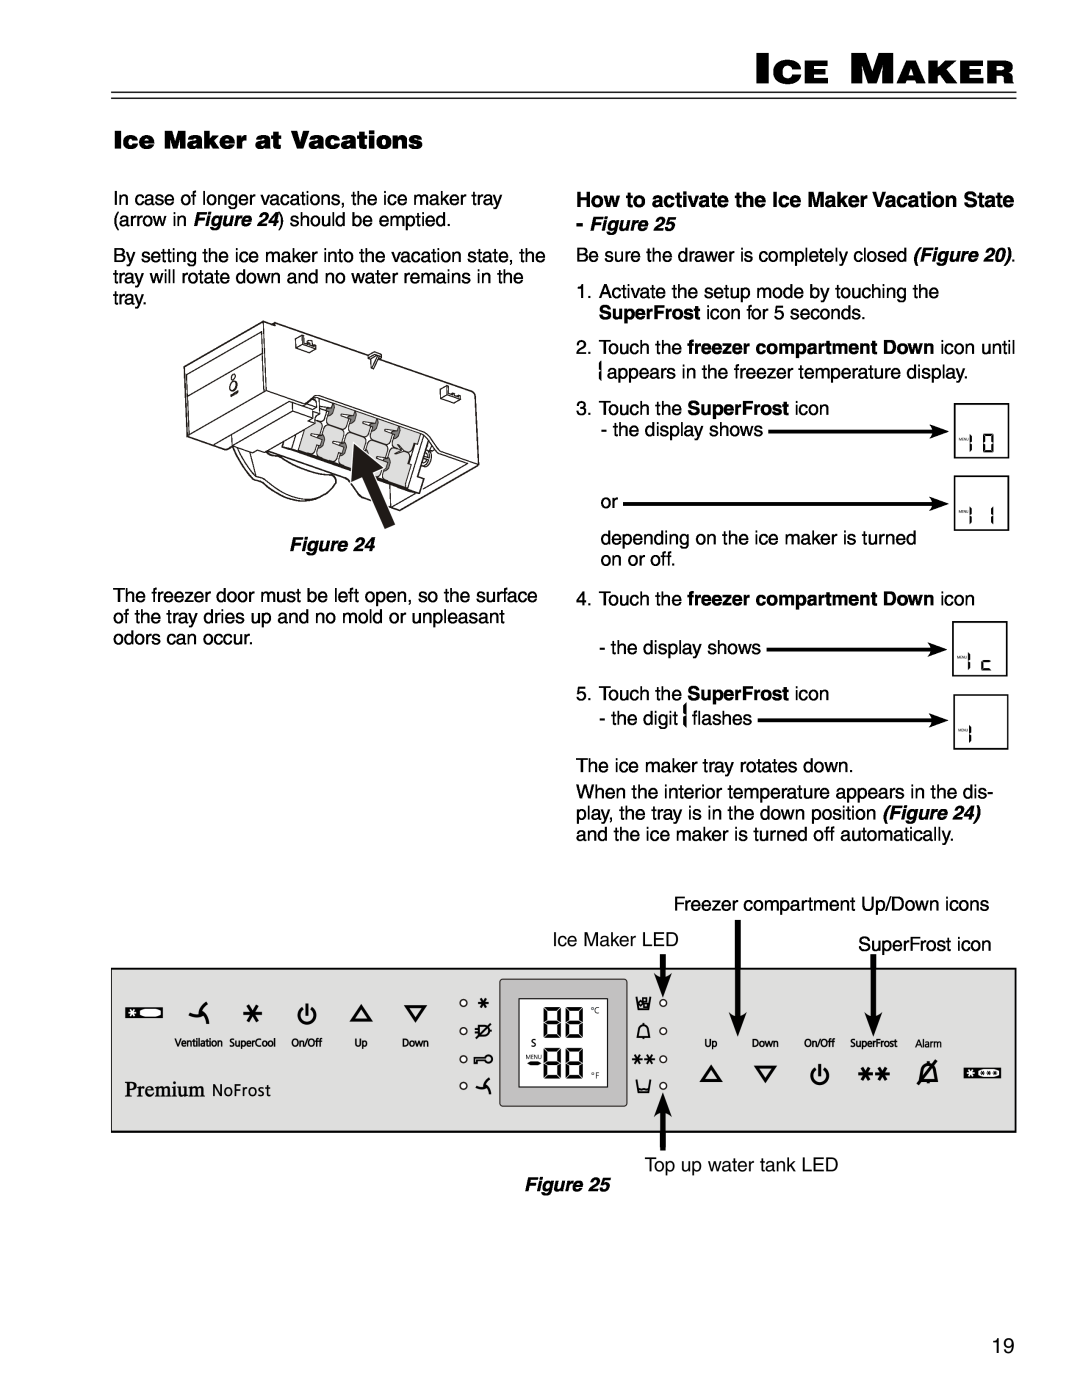 Liebherr CS 1640 7082 481-01 manual Ice Maker at Vacations, How to activate the Ice Maker Vacation State 